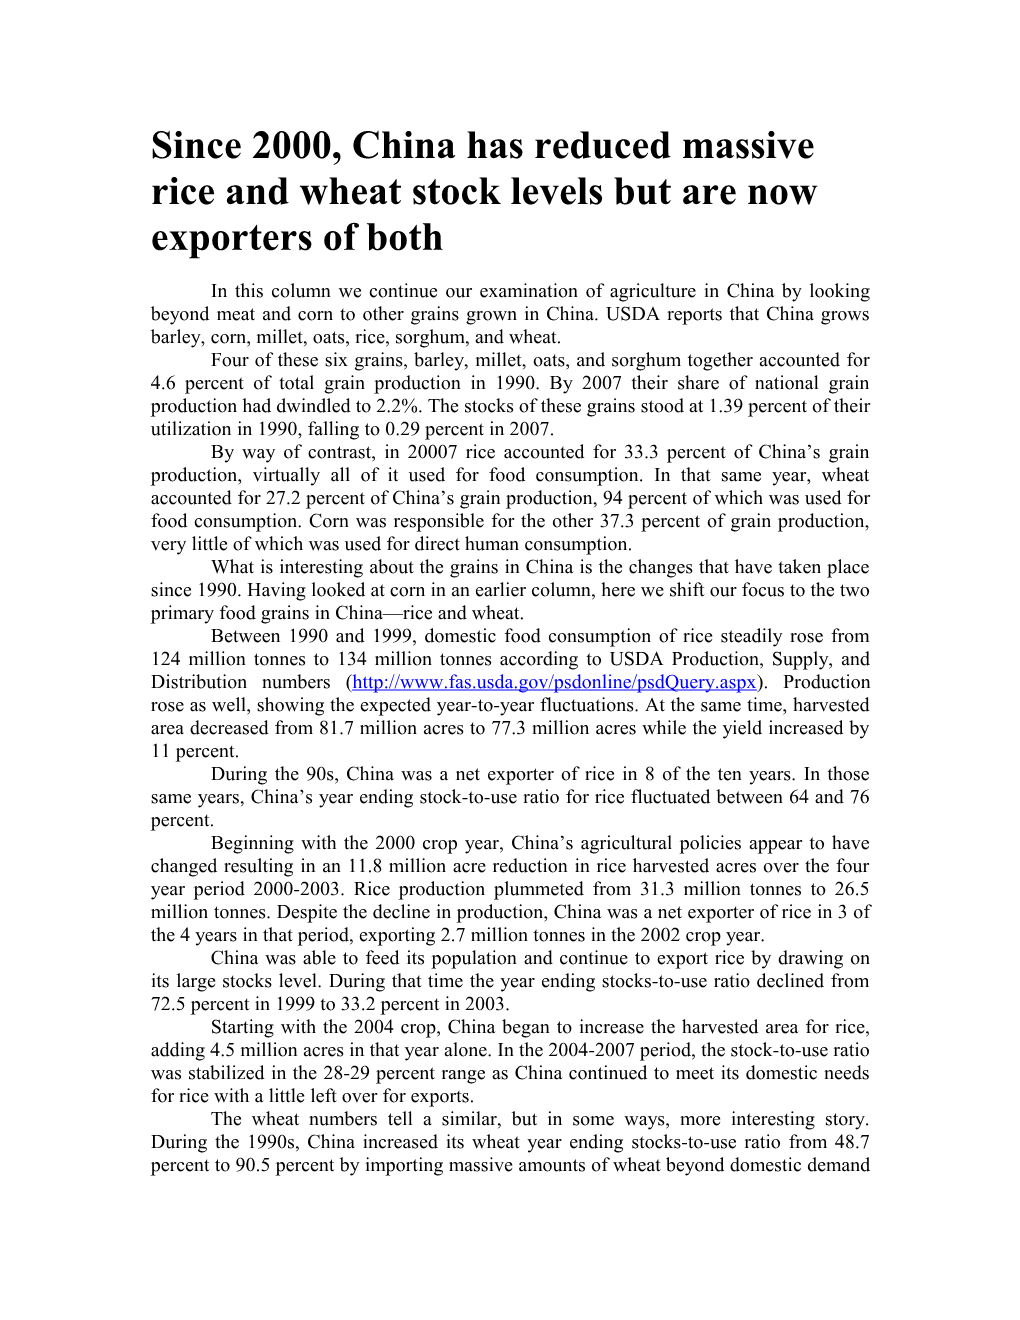 Since 2000, China Has Reduced Massive Rice and Wheat Stock Levels but Are Now Exporters of Both